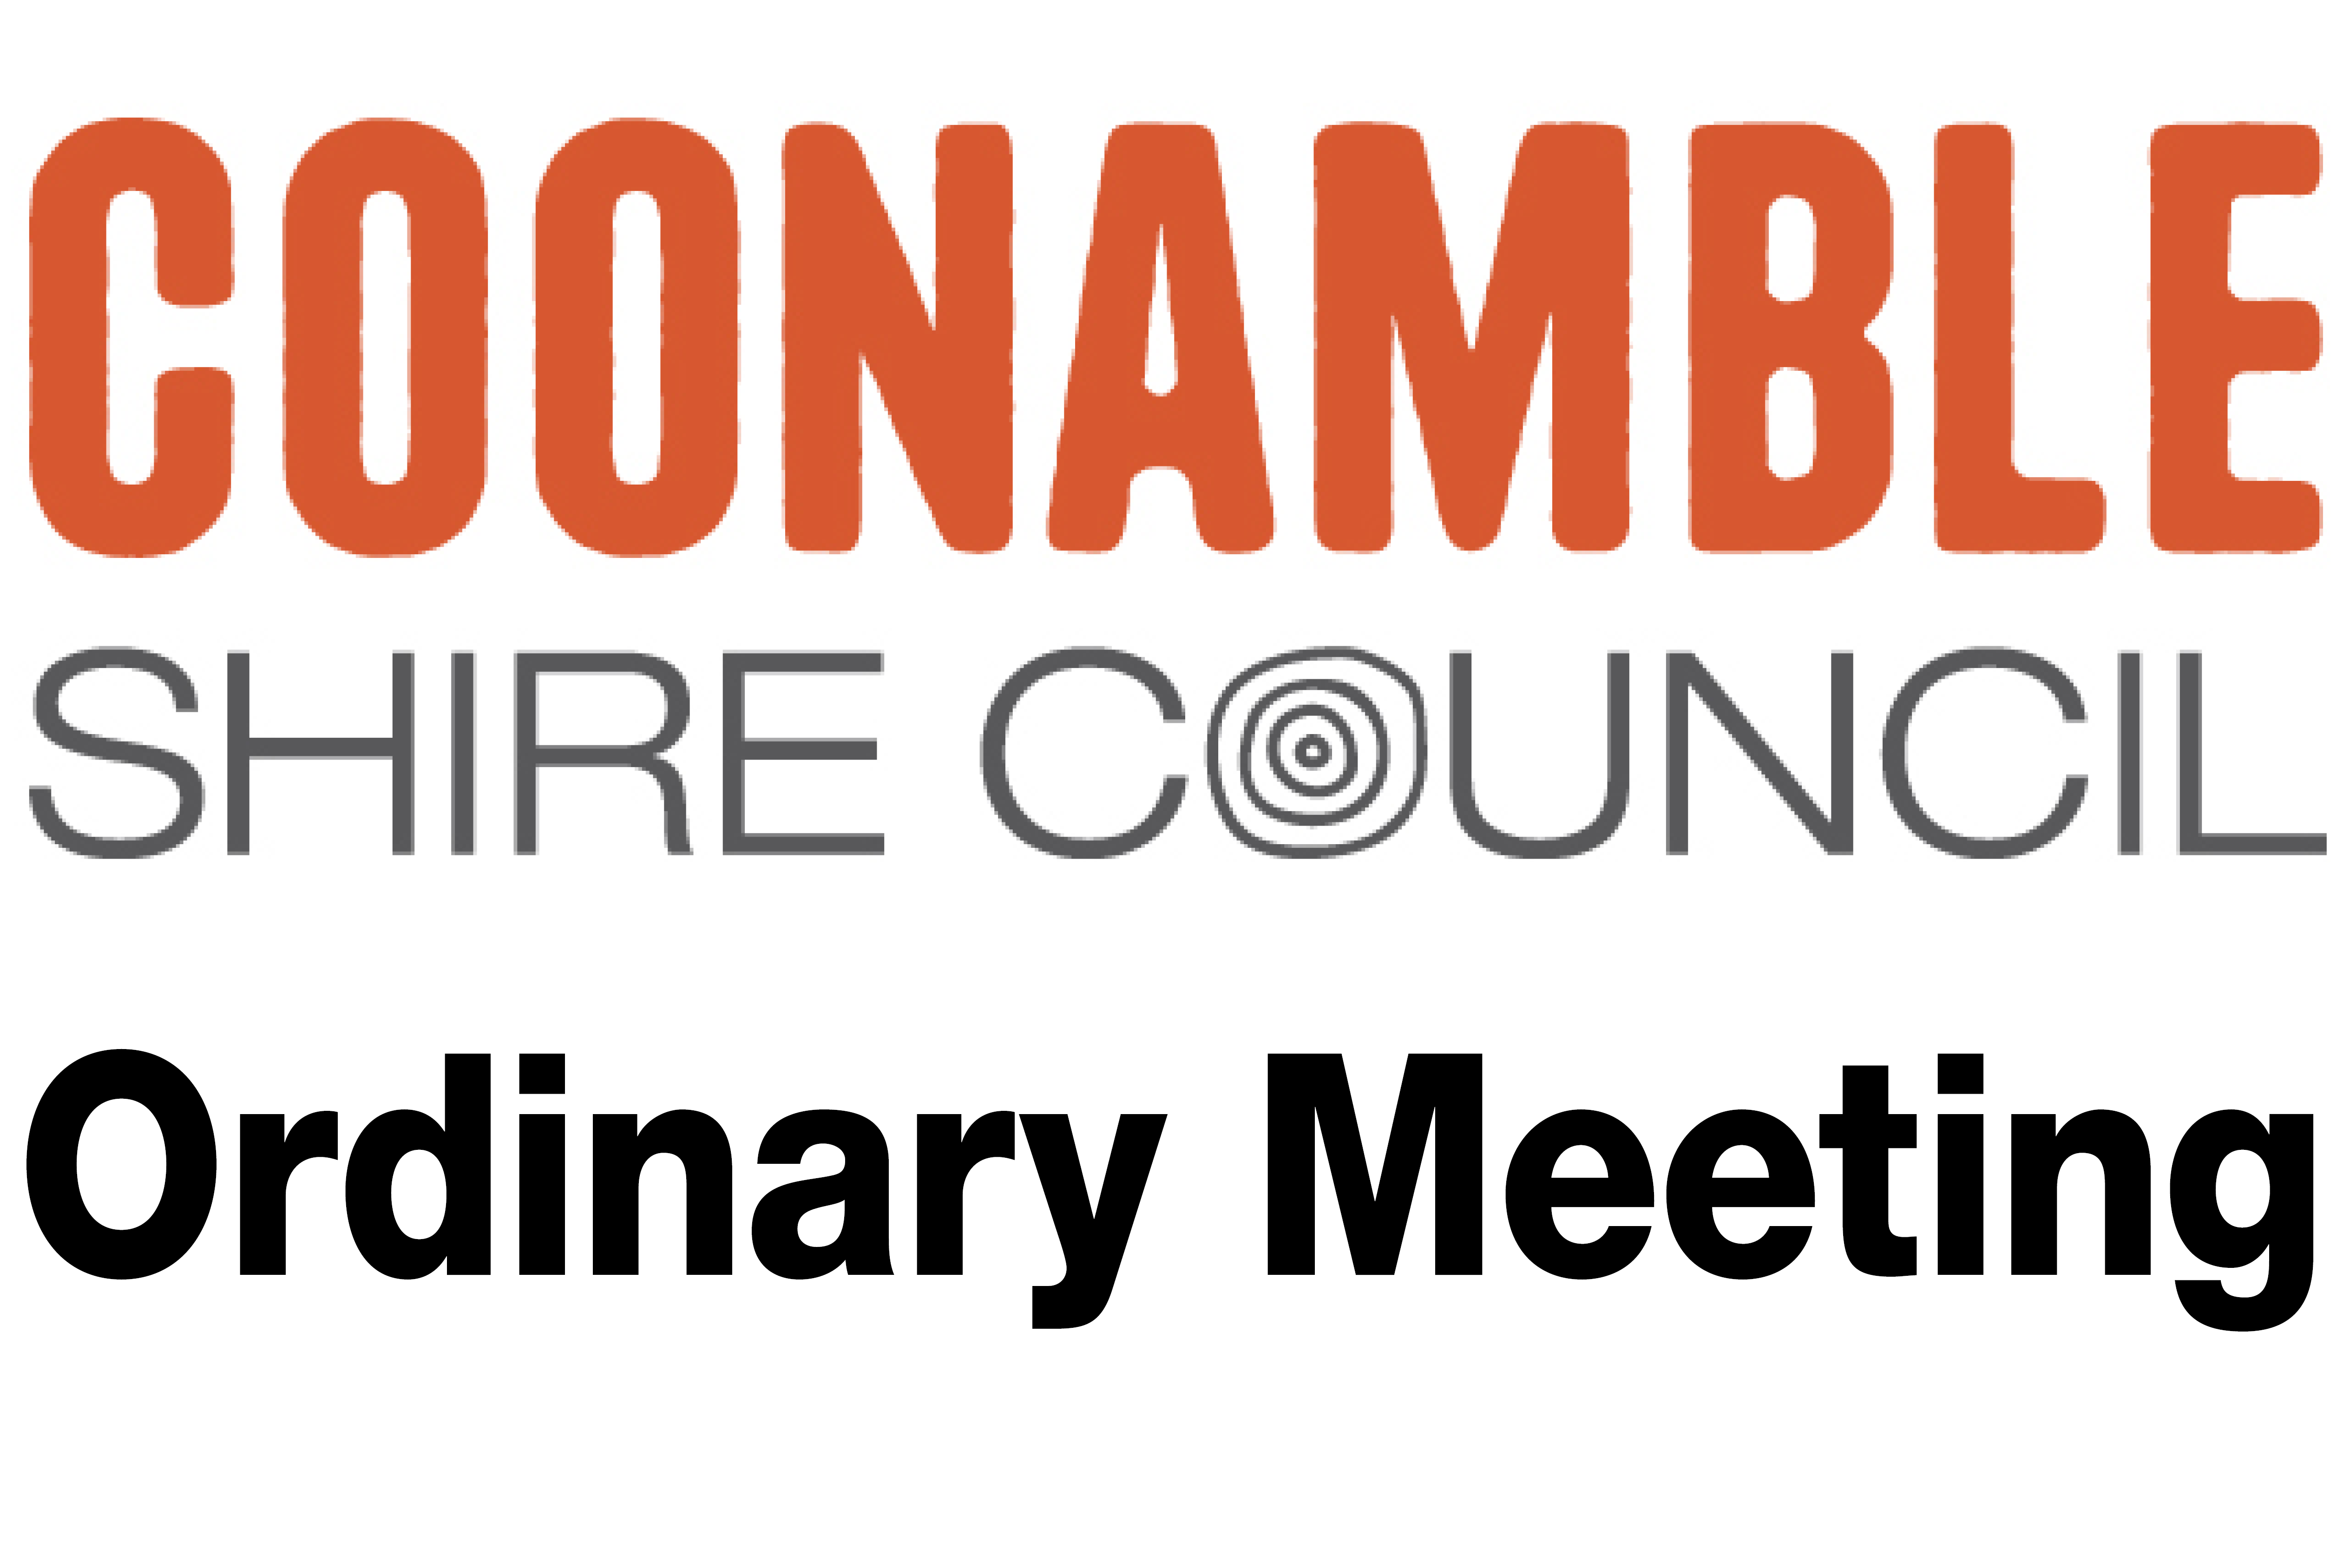 Ordinary Meeting of Coonamble Shire Council (in Coonamble)